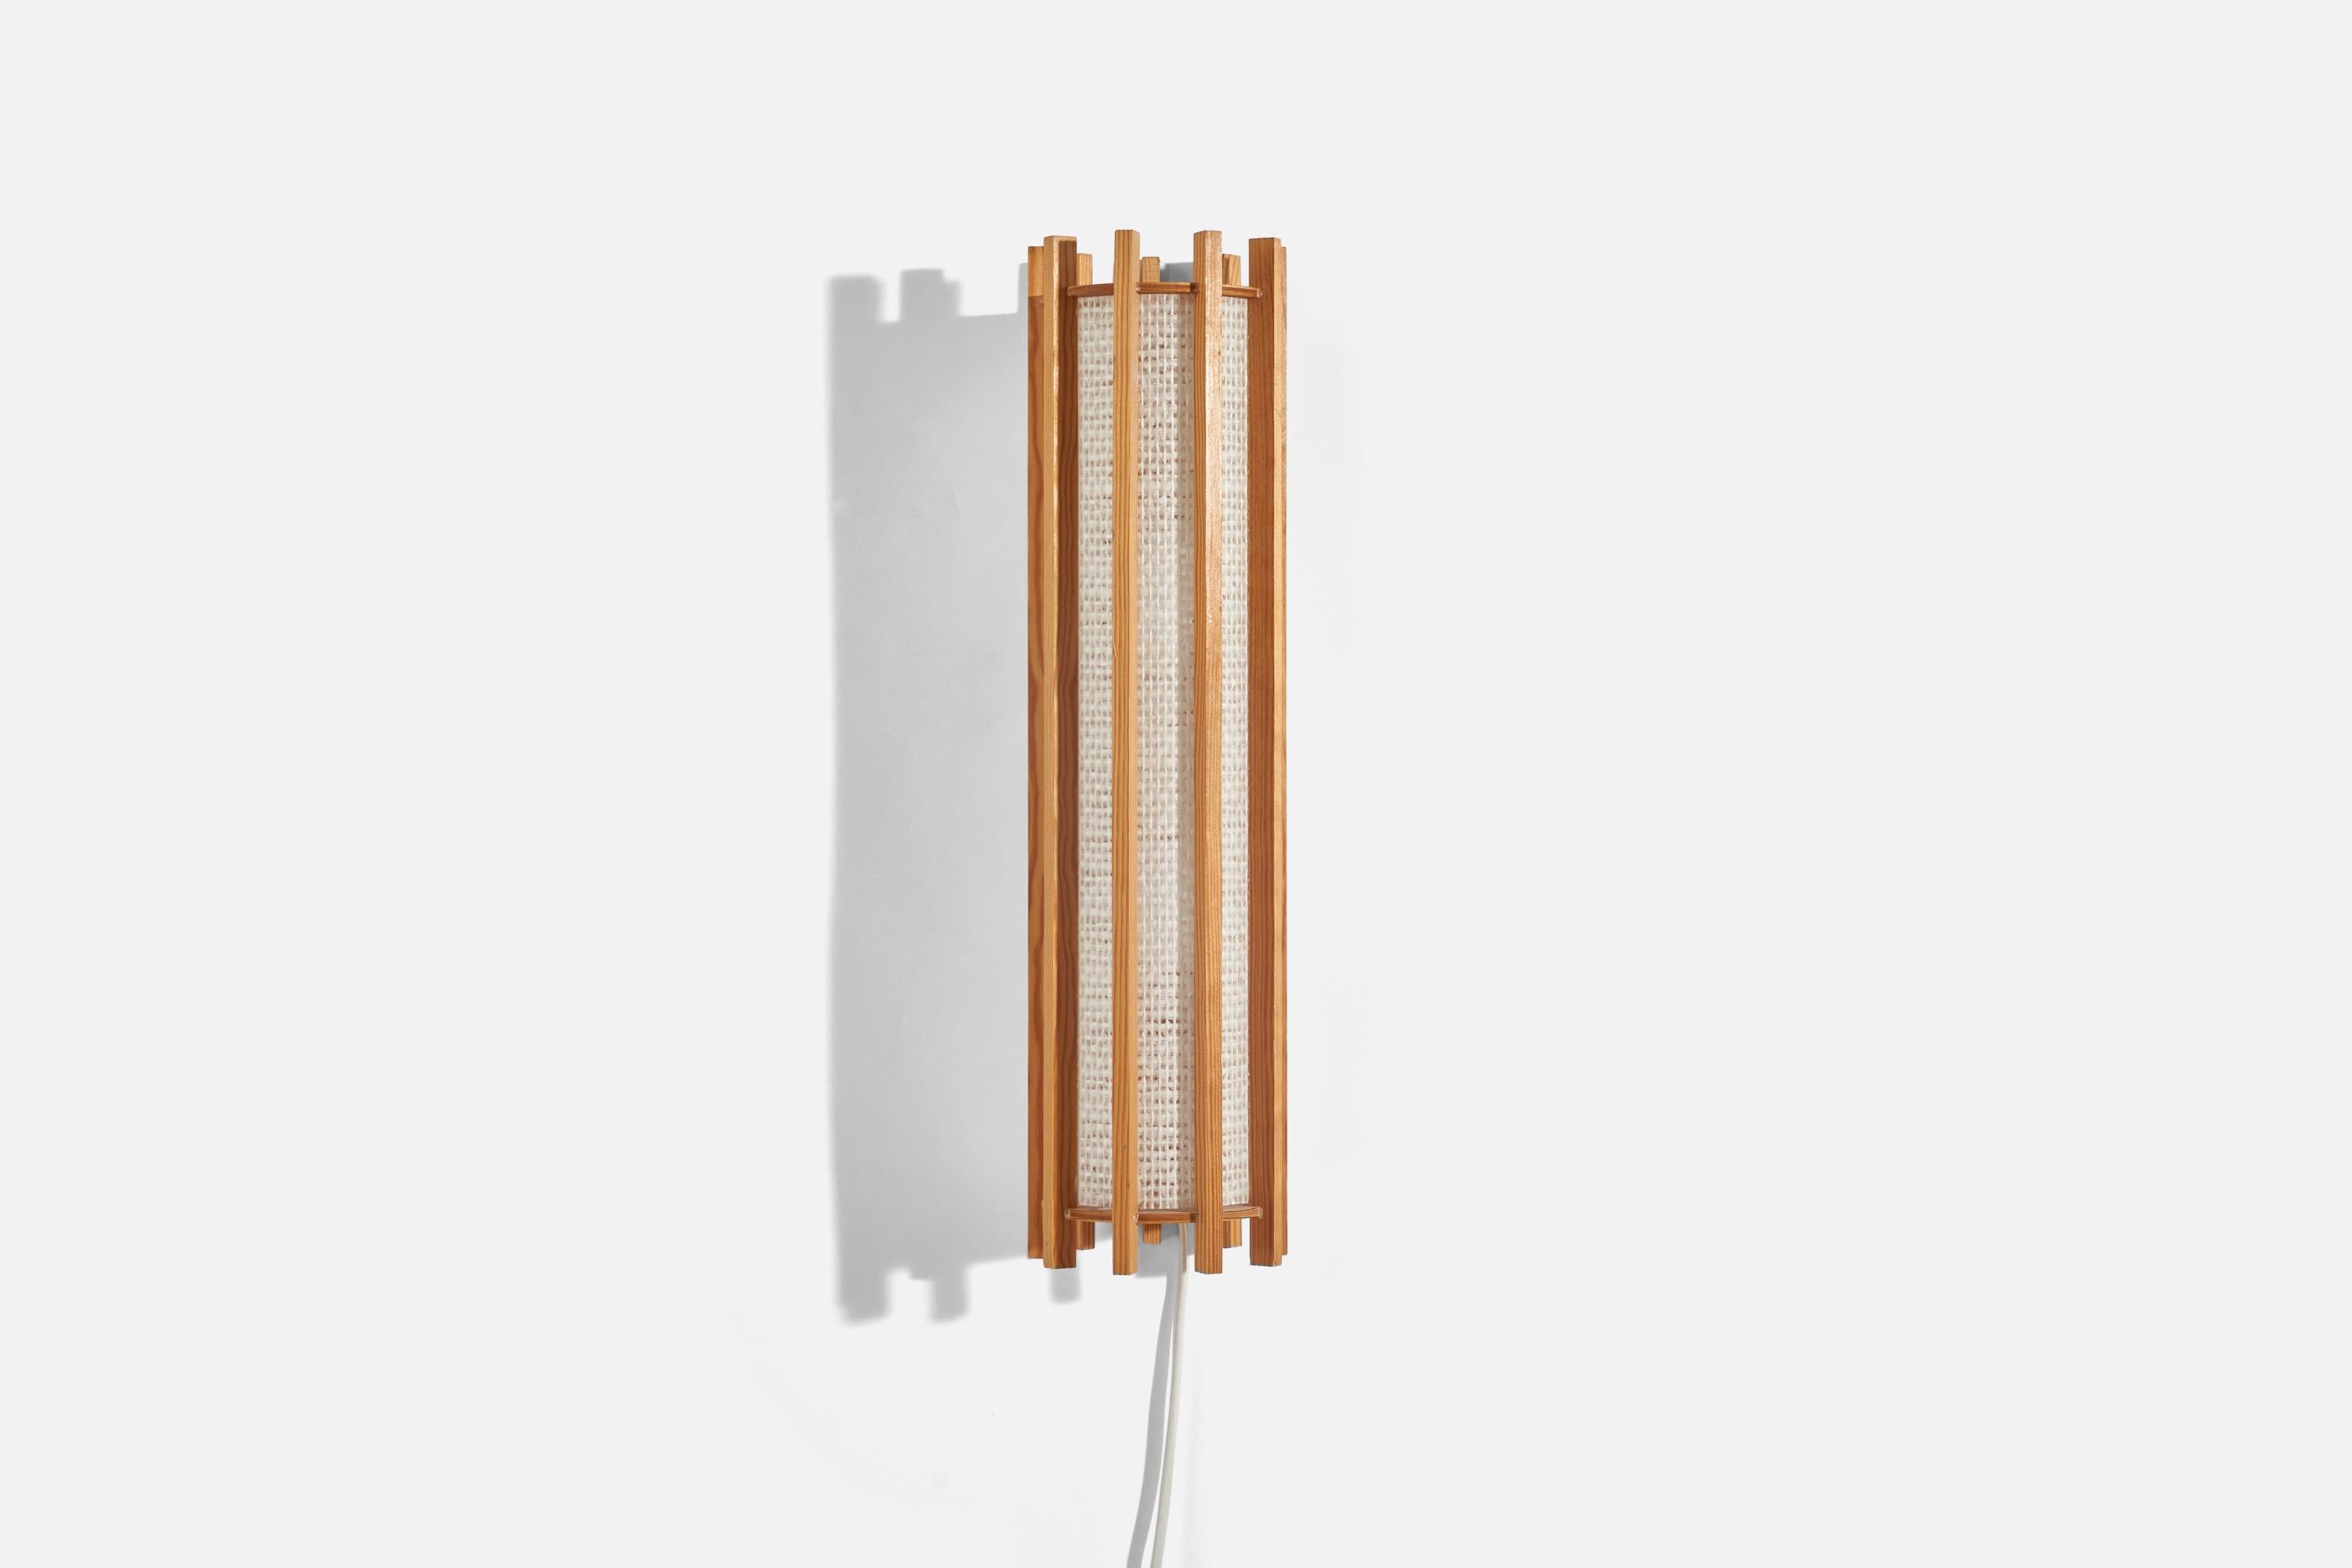 A pine and raffia sconce/ wall light designed and produced in Sweden, 1970s.

Dimensions of Back Plate (inches) : 14.5 x 1.6 x 0.56 (Height x Width x Depth)

Socket takes E-14 bulb.

There is no maximum wattage stated on the fixture.